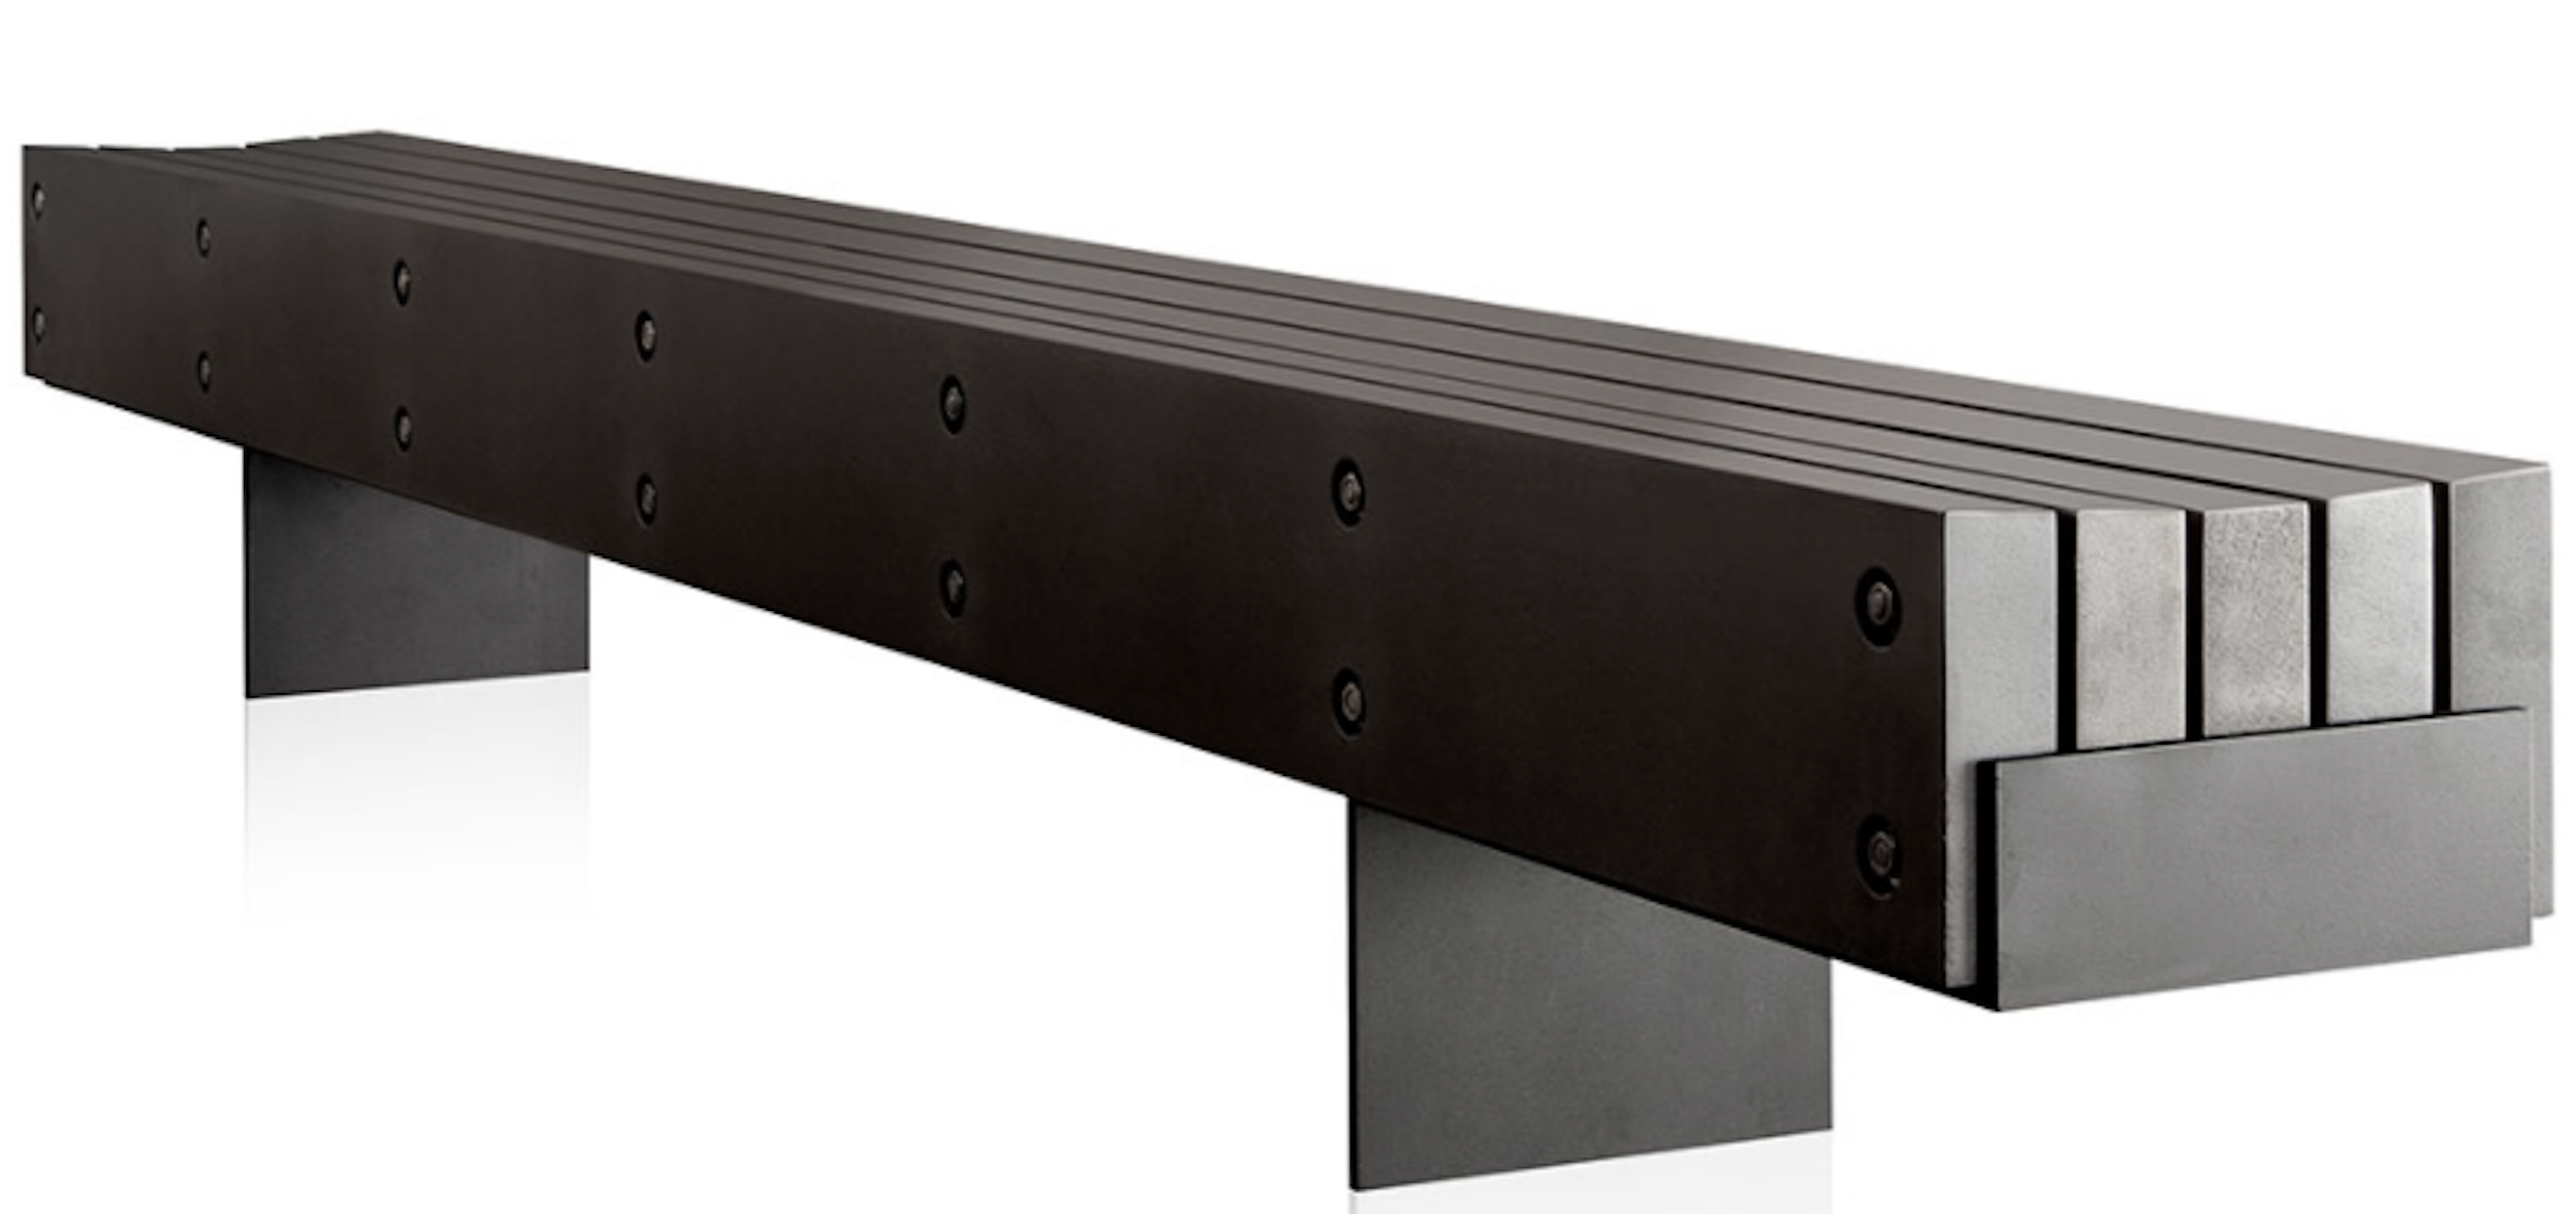 Product Image Beam Bench